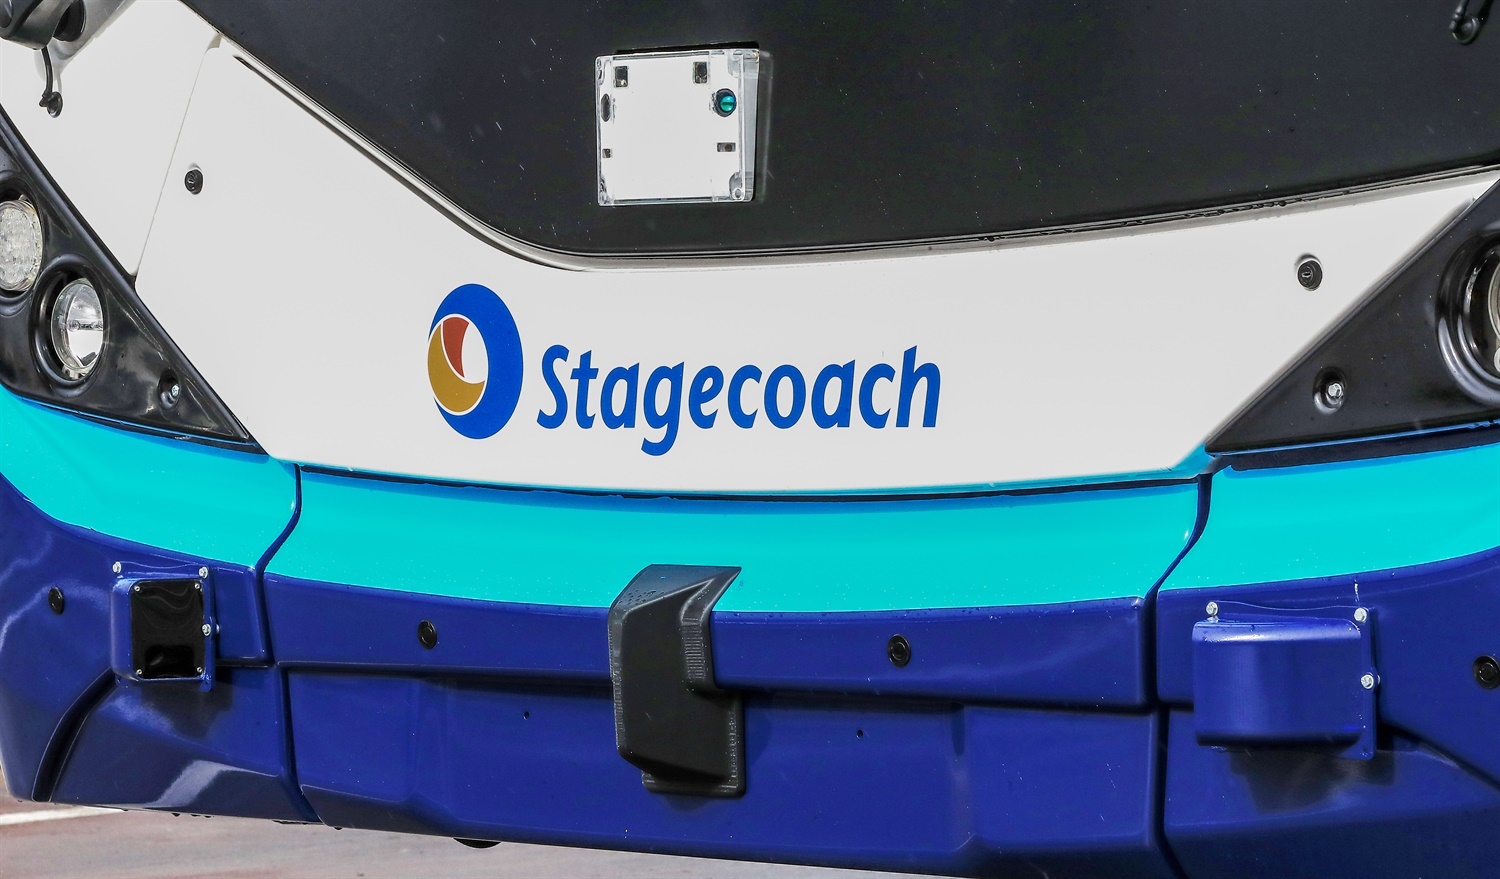 Stagecoach says it was disqualified because it rejected £1.6bn rail pensions risk 